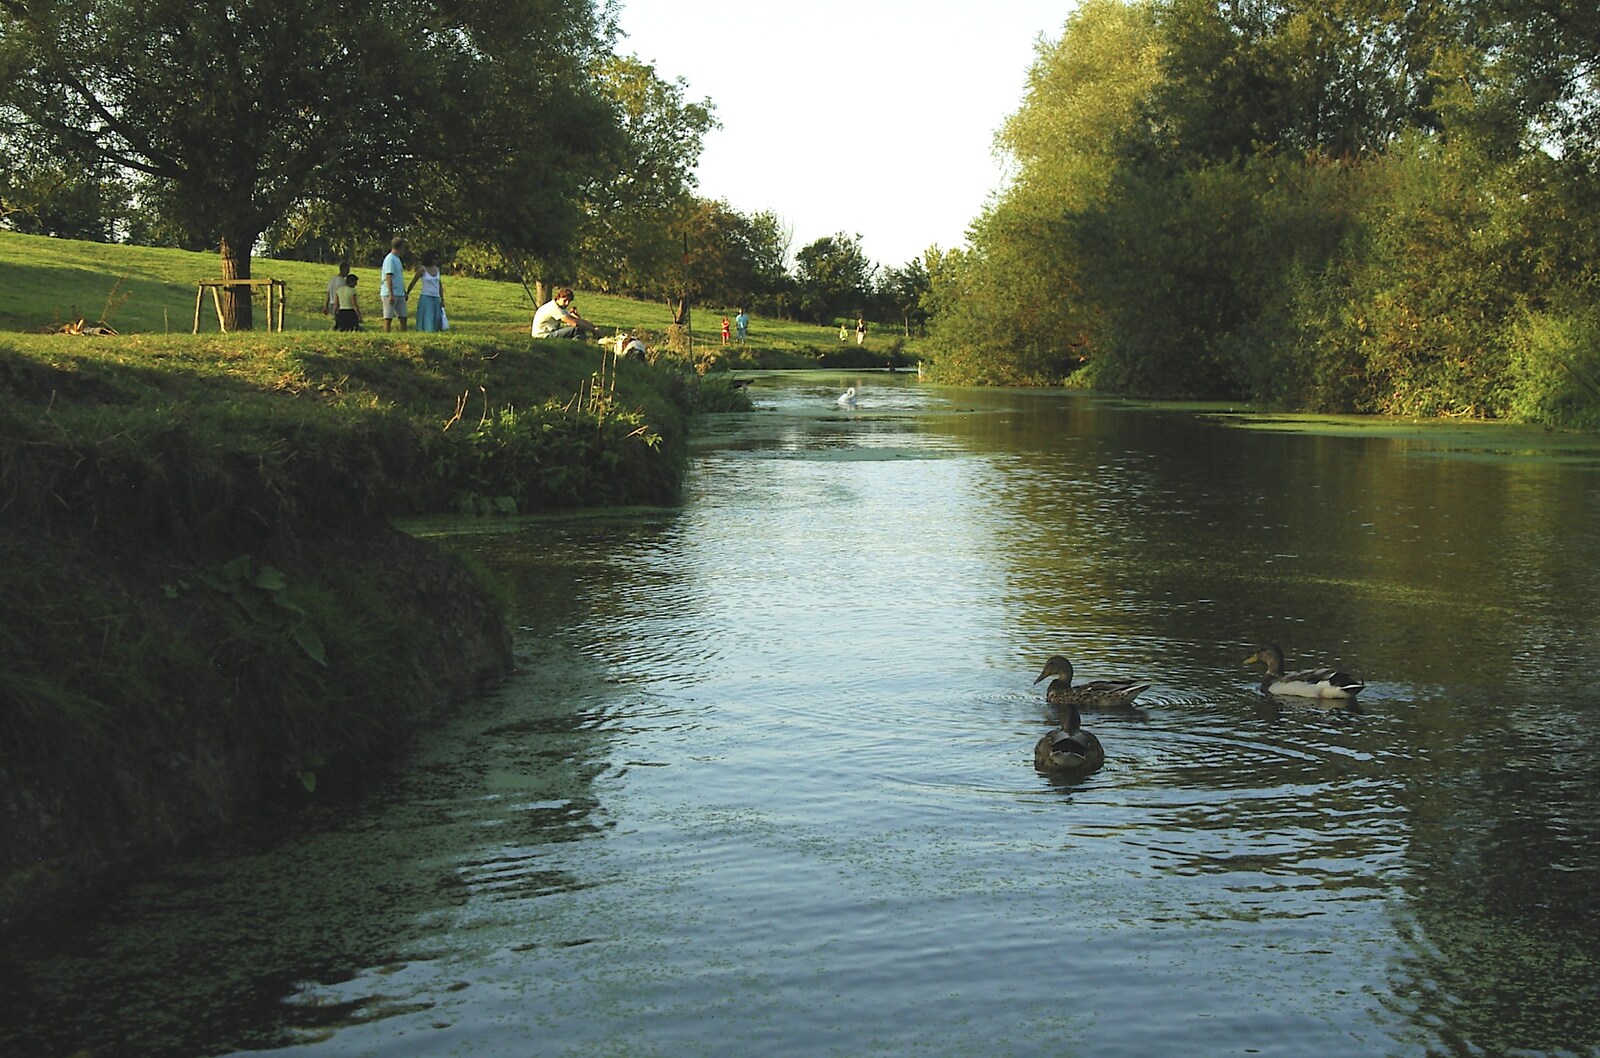 Ducks on the Cam from Grantchester Meadows, Alex Hill at Revs and Spitfires - 10th September 2006